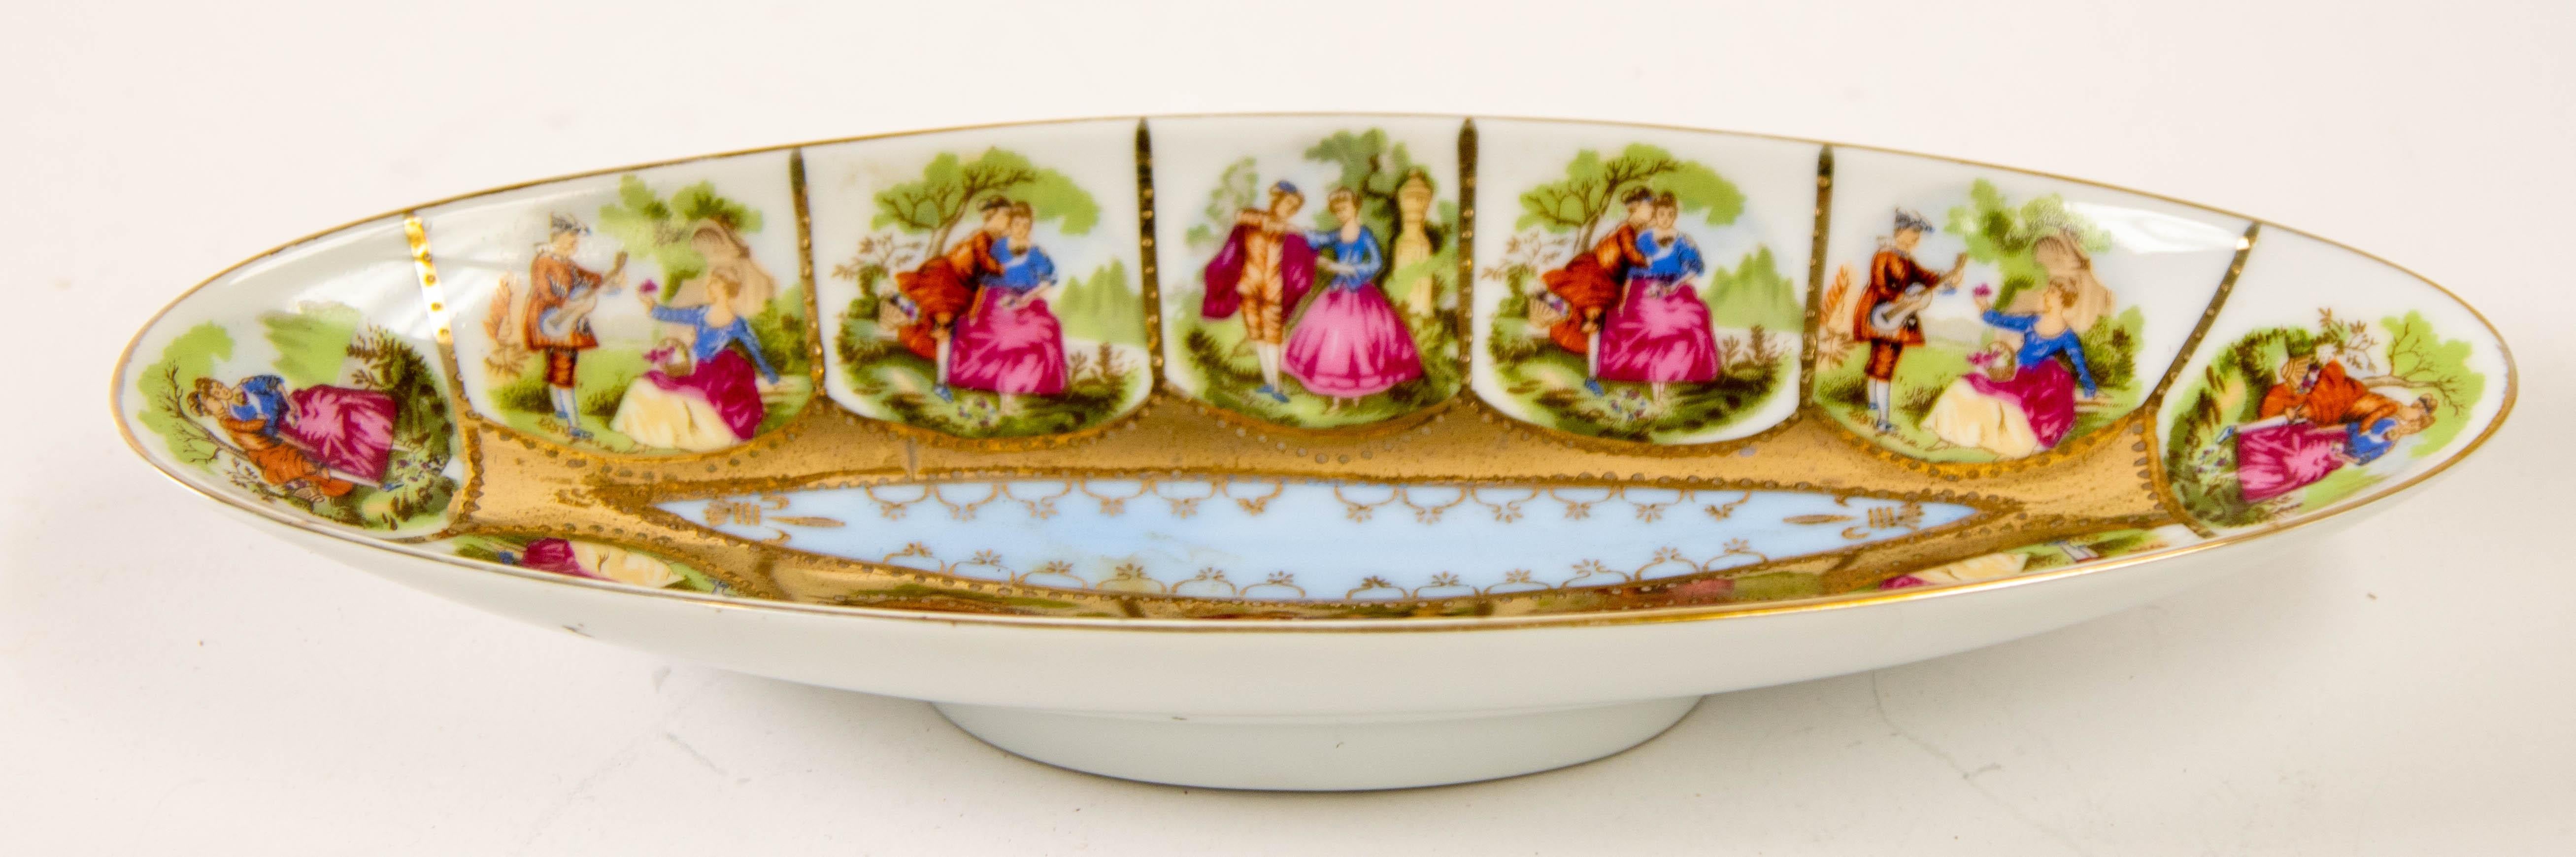 Royal Vienna Austria Hand Painted Porcelain Oval Dish circa 1940 For Sale 5